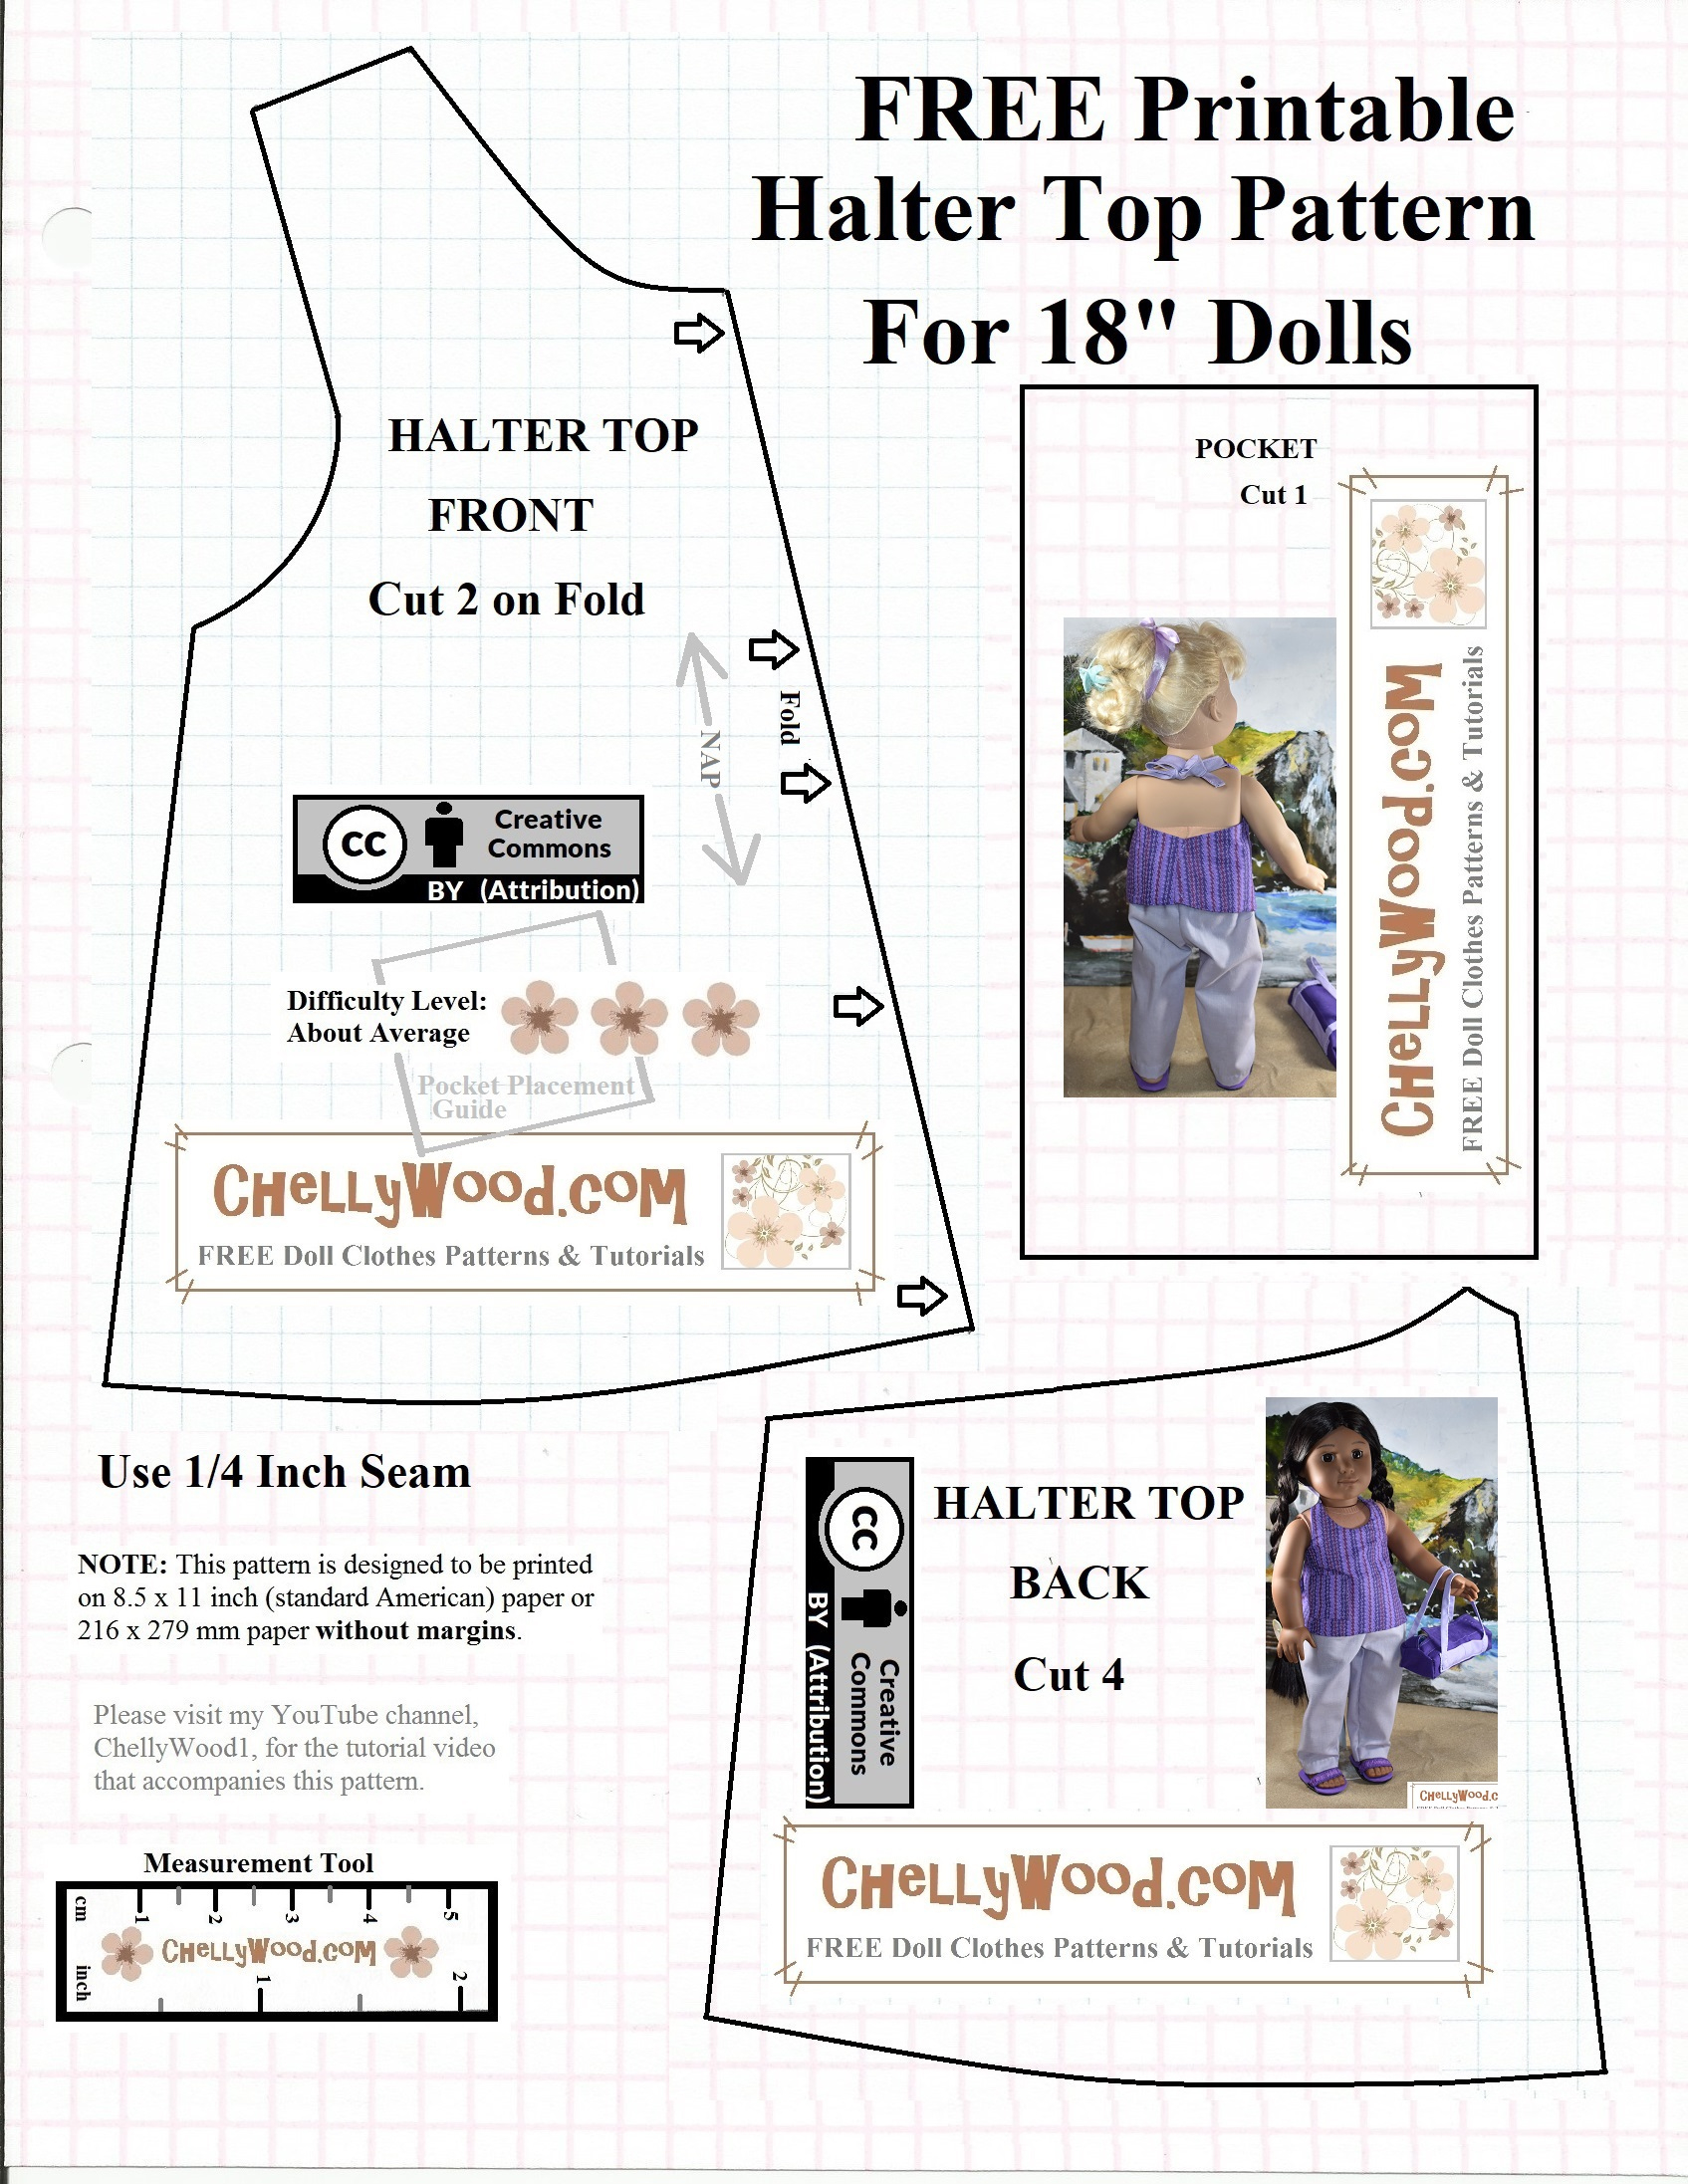 Free #Agdoll Summer Shirt Pattern @ Chellywood #Sewing 4#Dolls within American Girl Clothes Patterns Free Printable